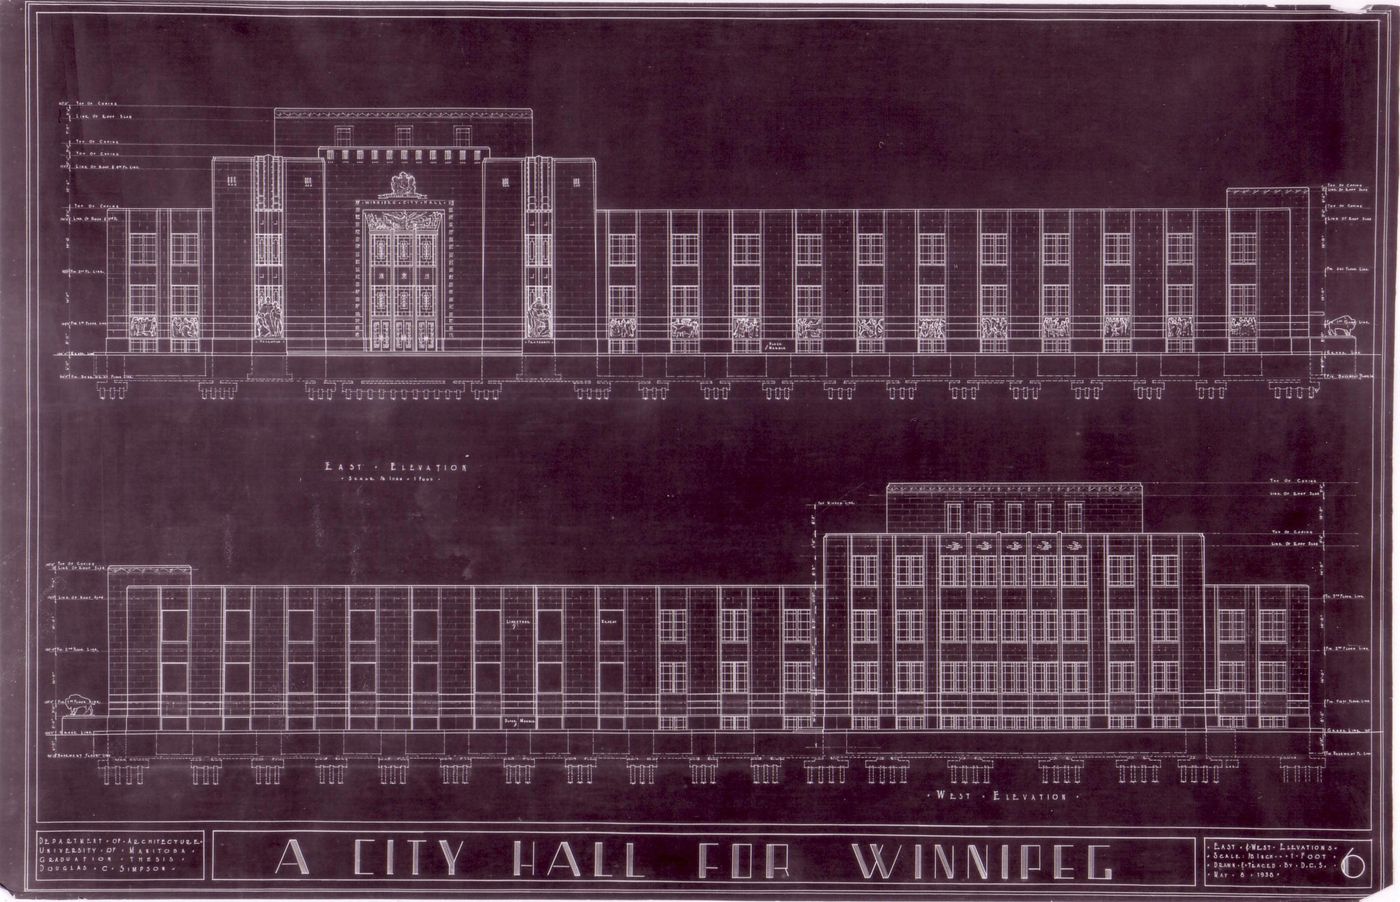 A City Hall for Winnipeg: East and West elevations